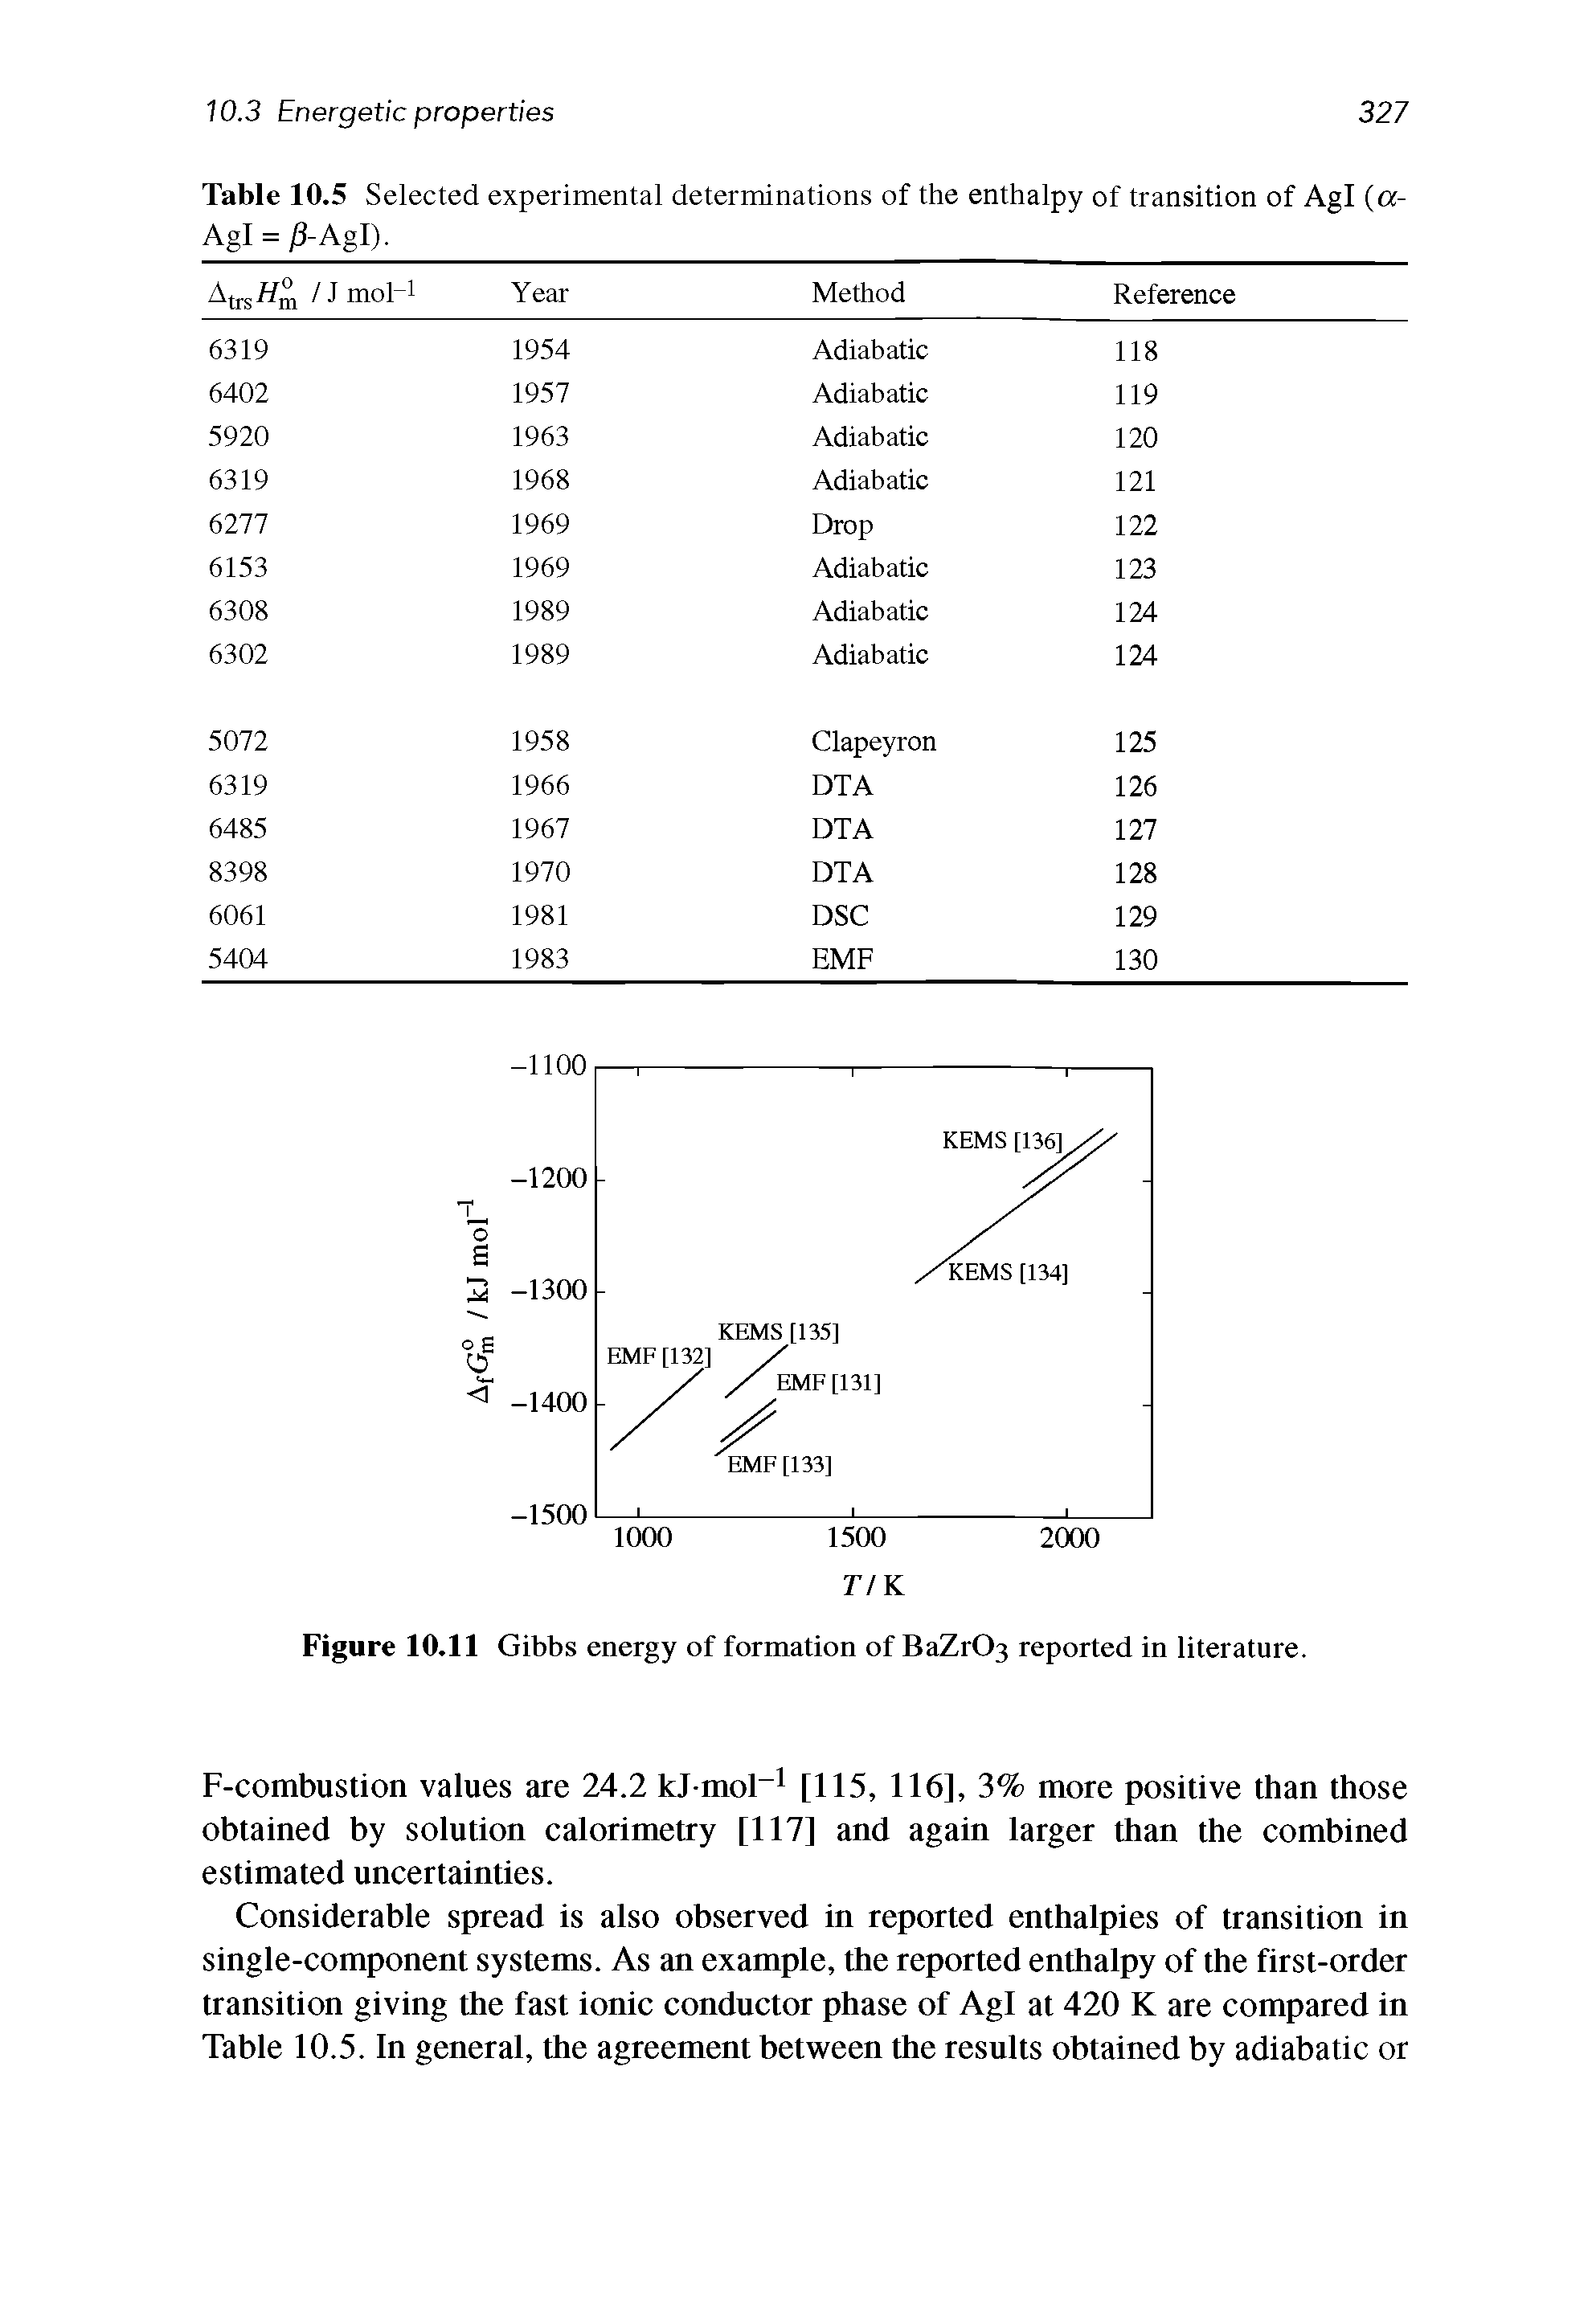 Table 10.5 Selected experimental determinations of the enthalpy of transition of Agl (a-Agl = j8-Agl).